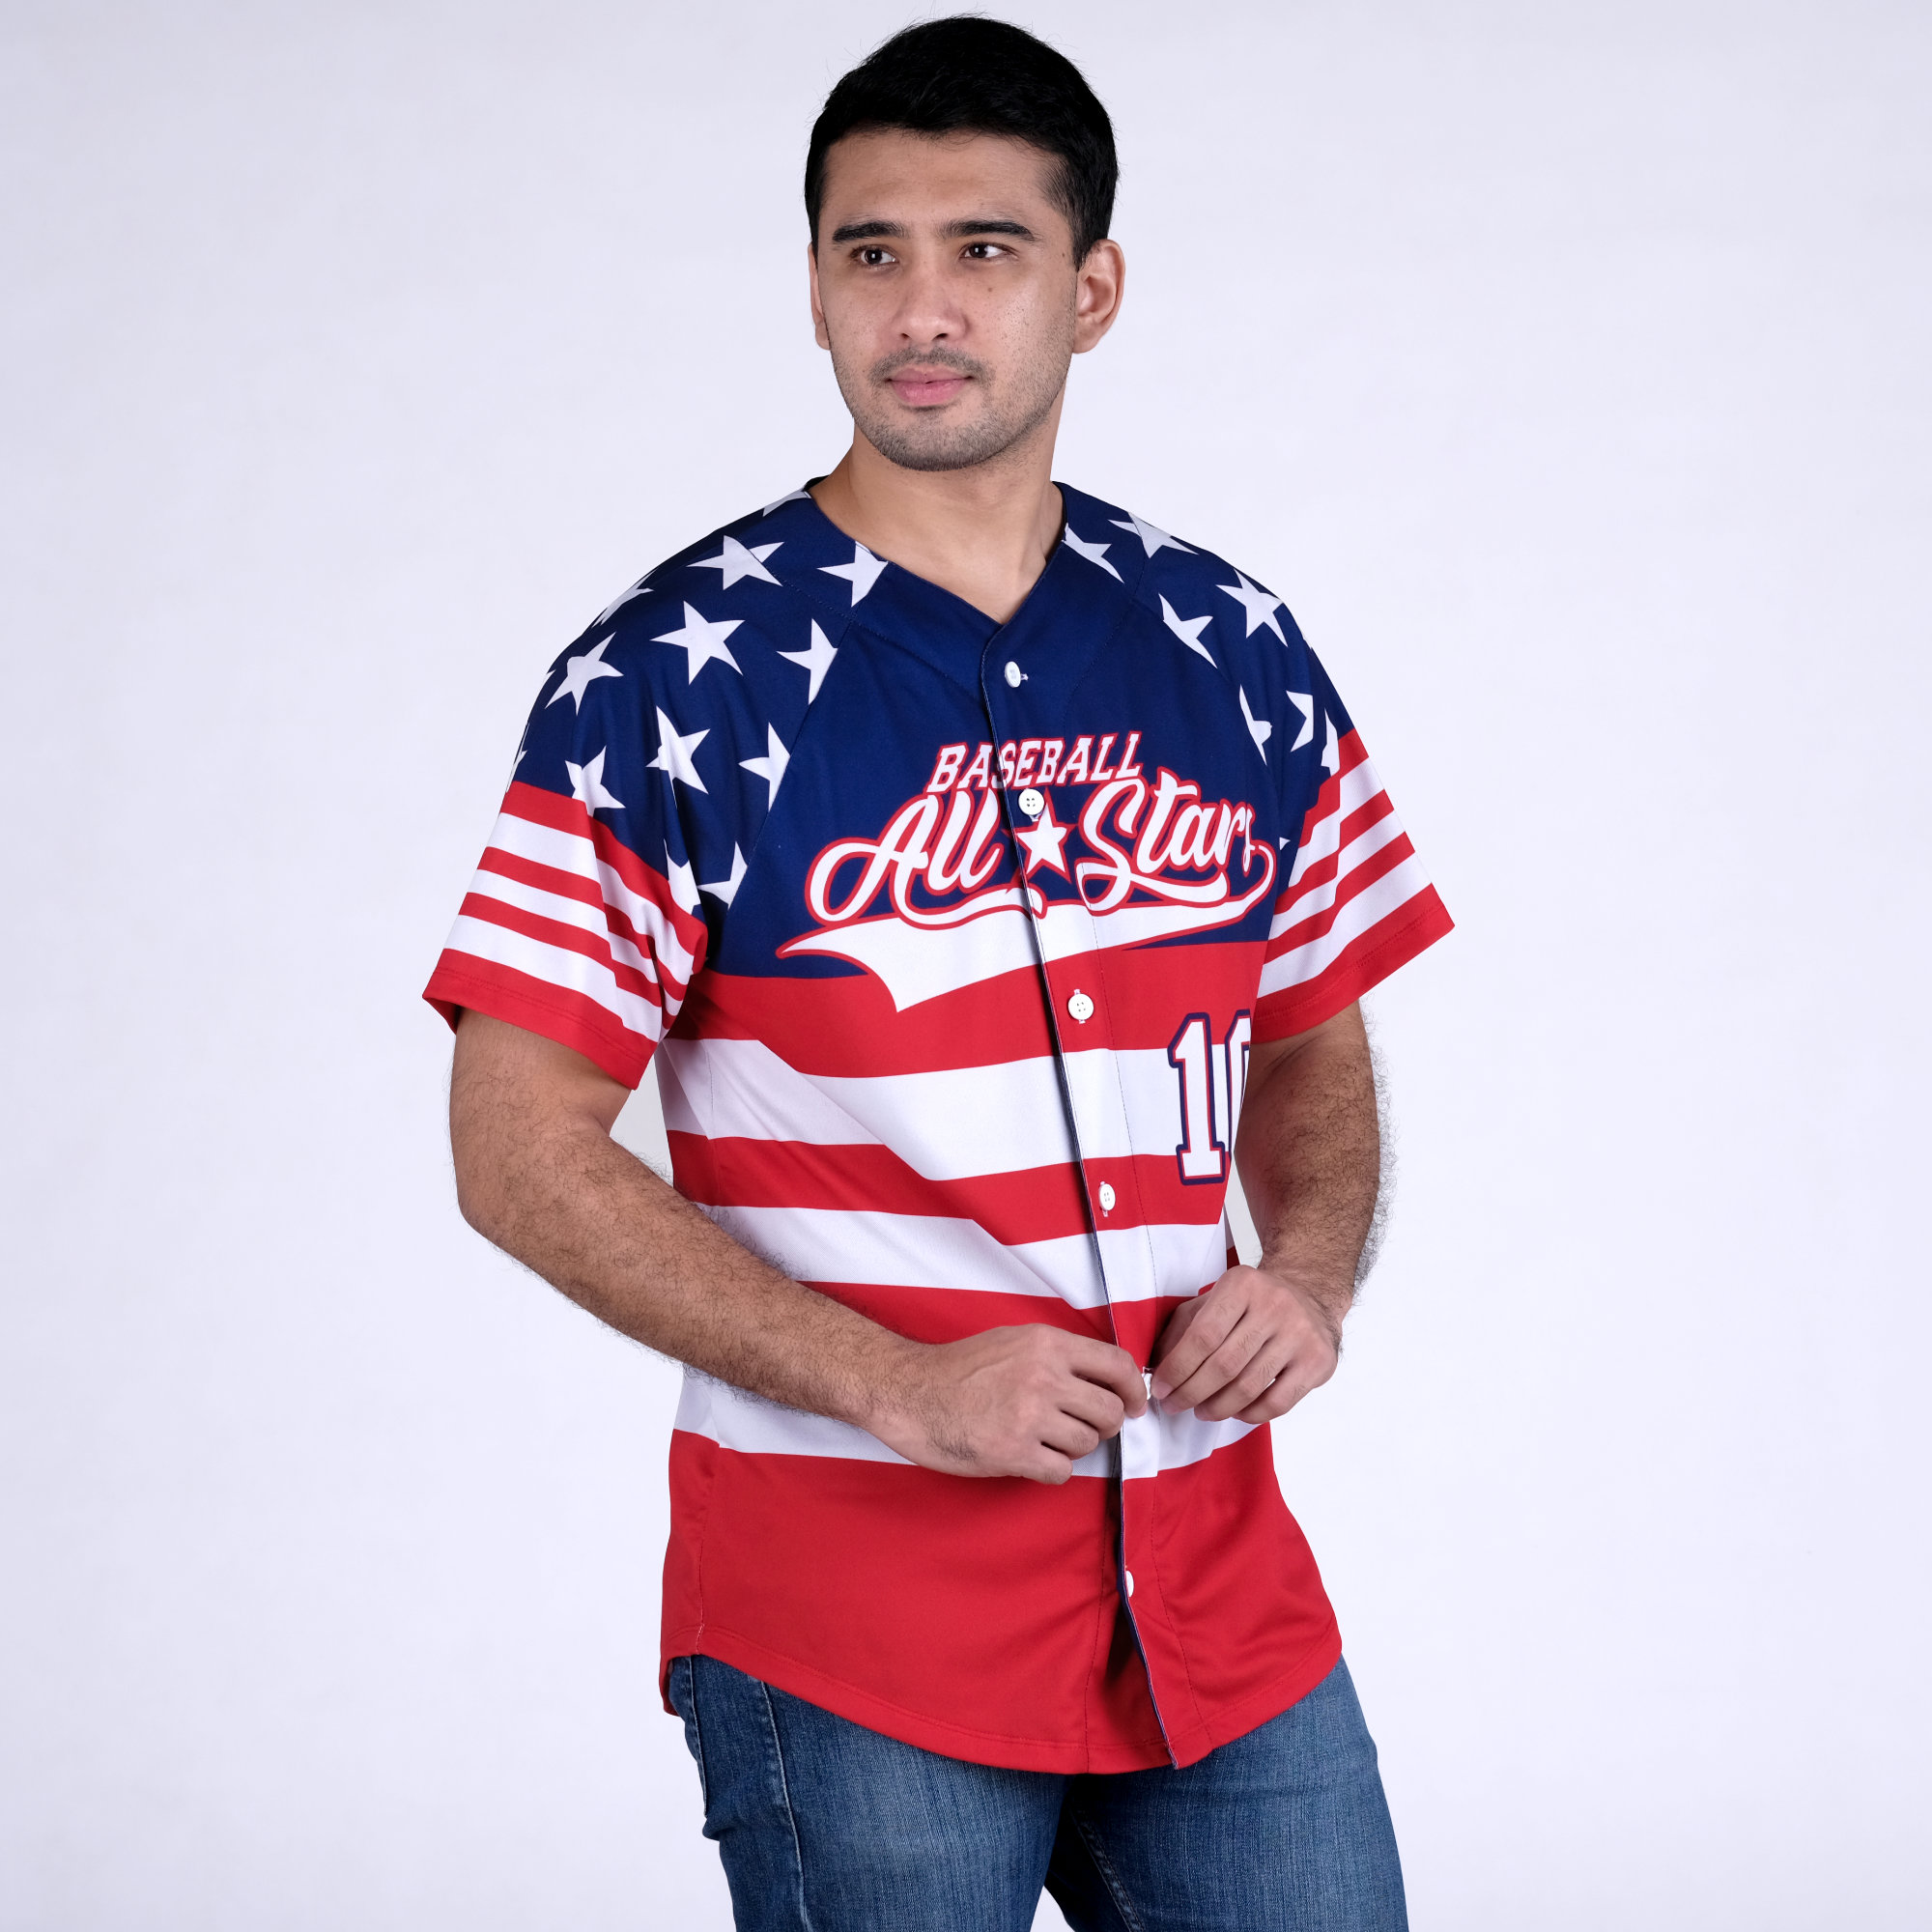 Red White And Blue Baseball Jersey - www.inf-inet.com